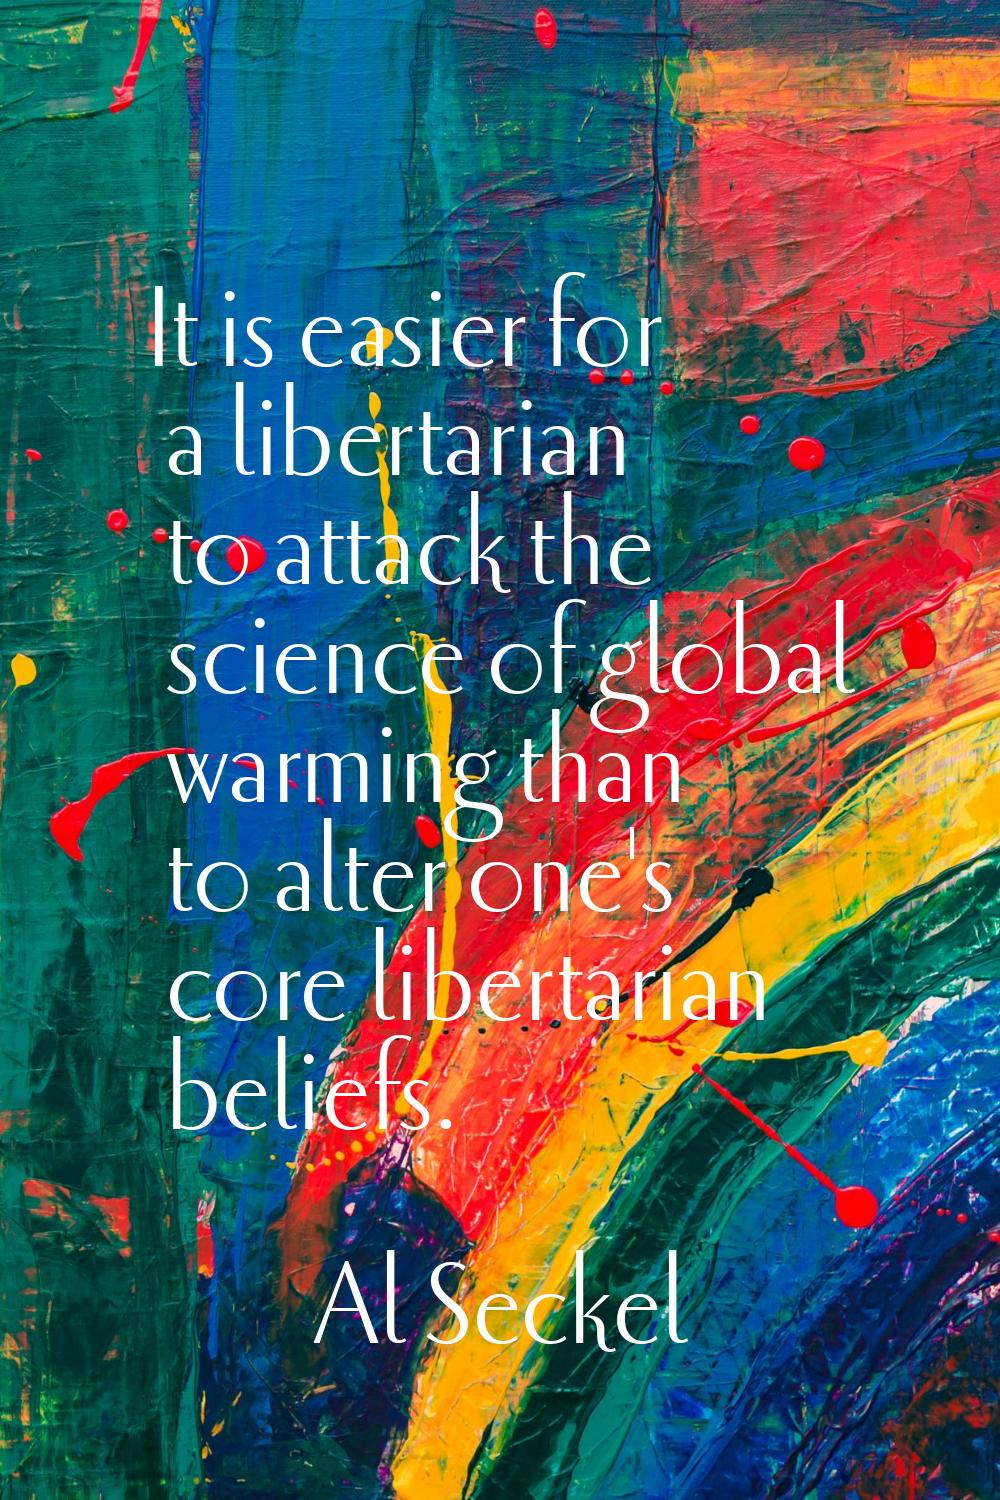 It is easier for a libertarian to attack the science of global warming than to alter one's core lib